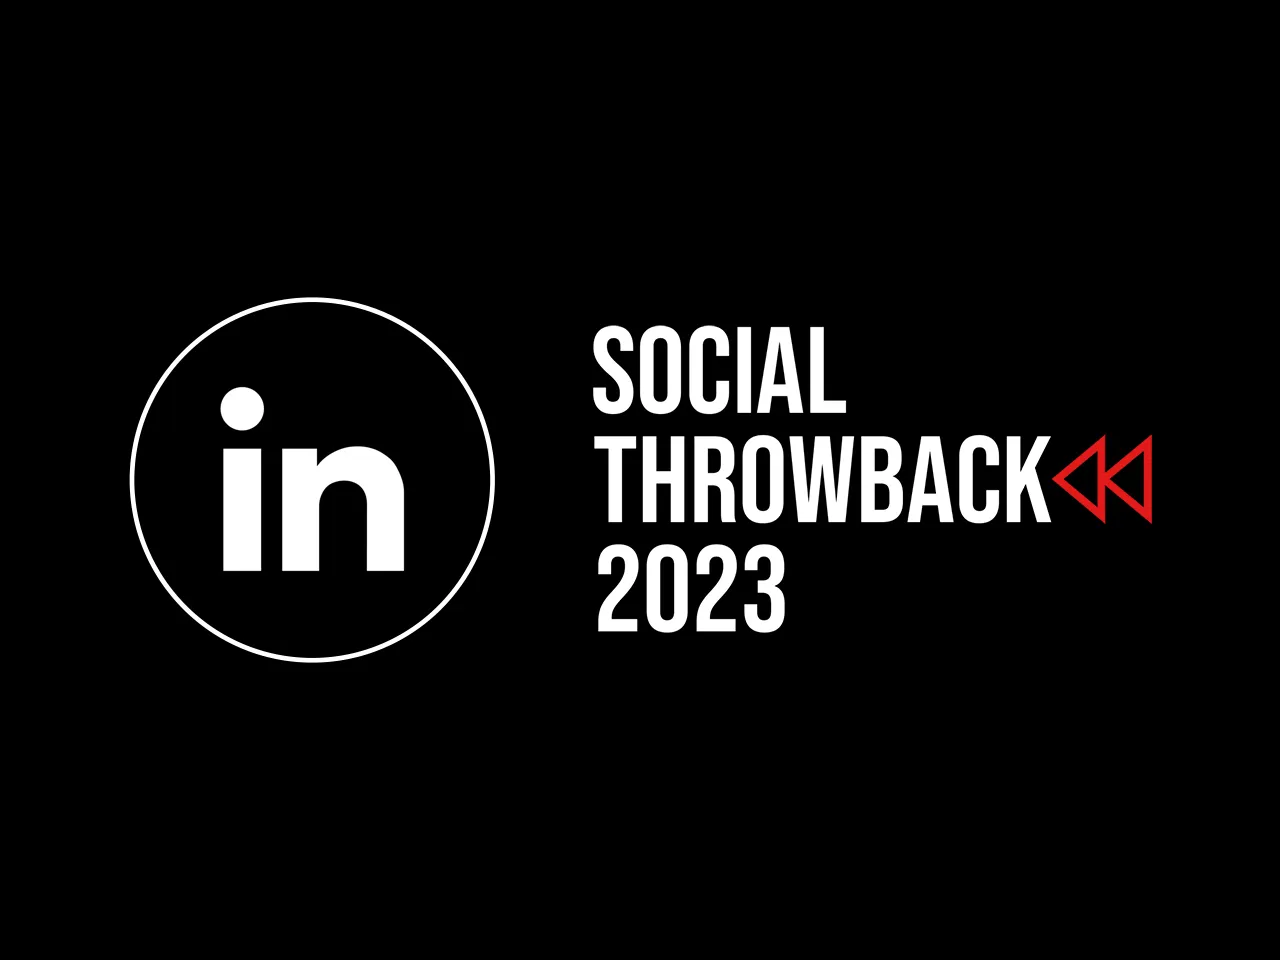 Social Throwback 2023: Navigating the professional landscape with LinkedIn's 2023 updates